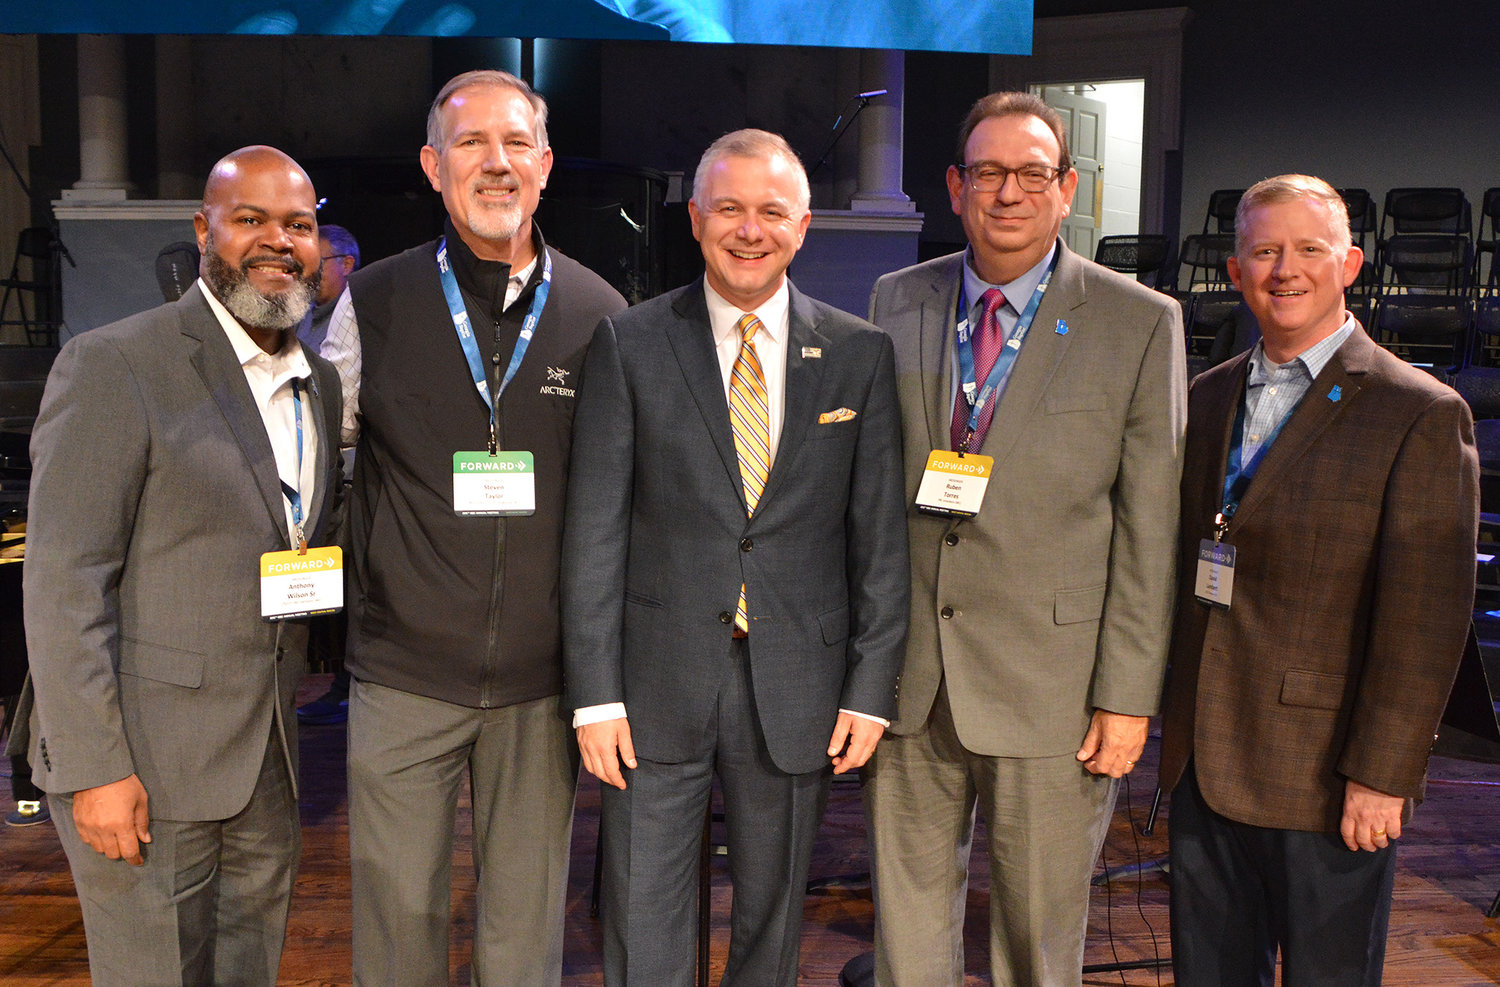 Torres, Wilson, Taylor and Lambert were elected vice presidents at the Georgia Baptist Convention